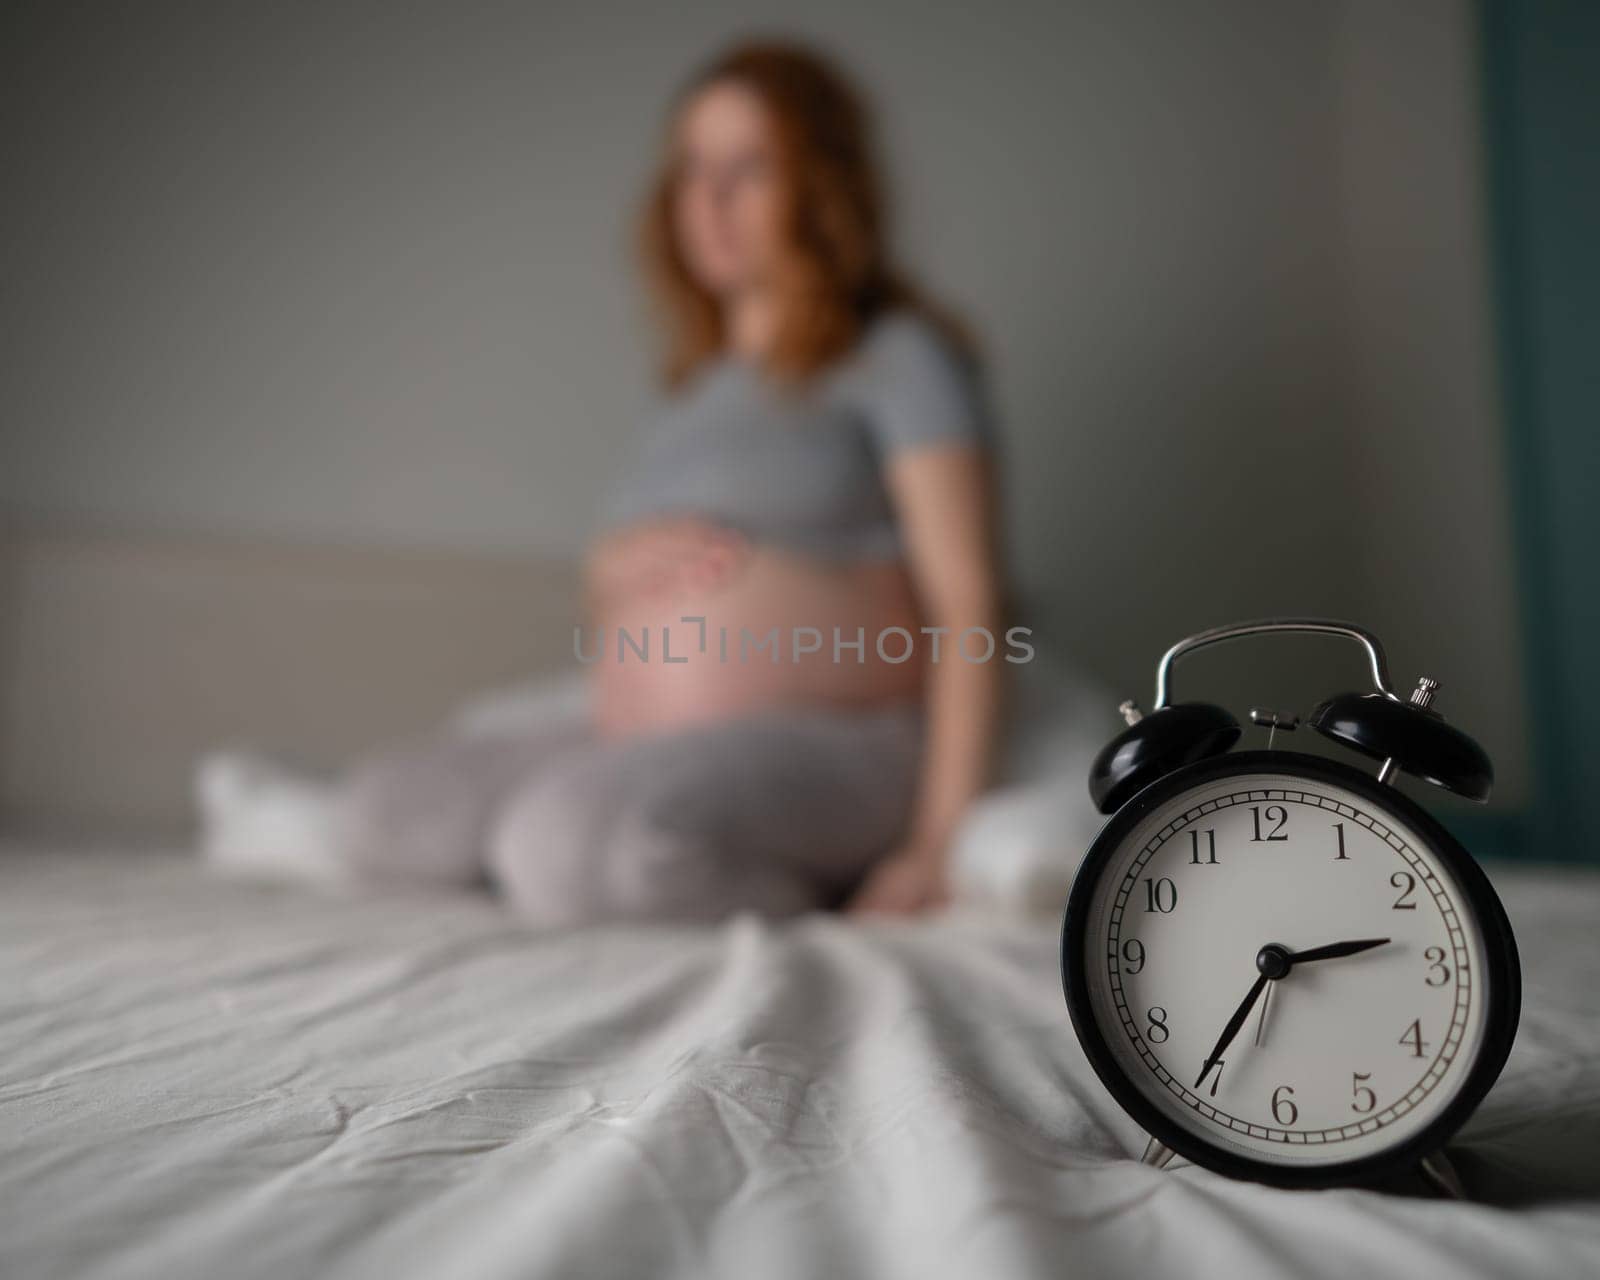 Caucasian pregnant woman sits on the bed and suffers from insomnia. Alarm clock in the foreground. by mrwed54